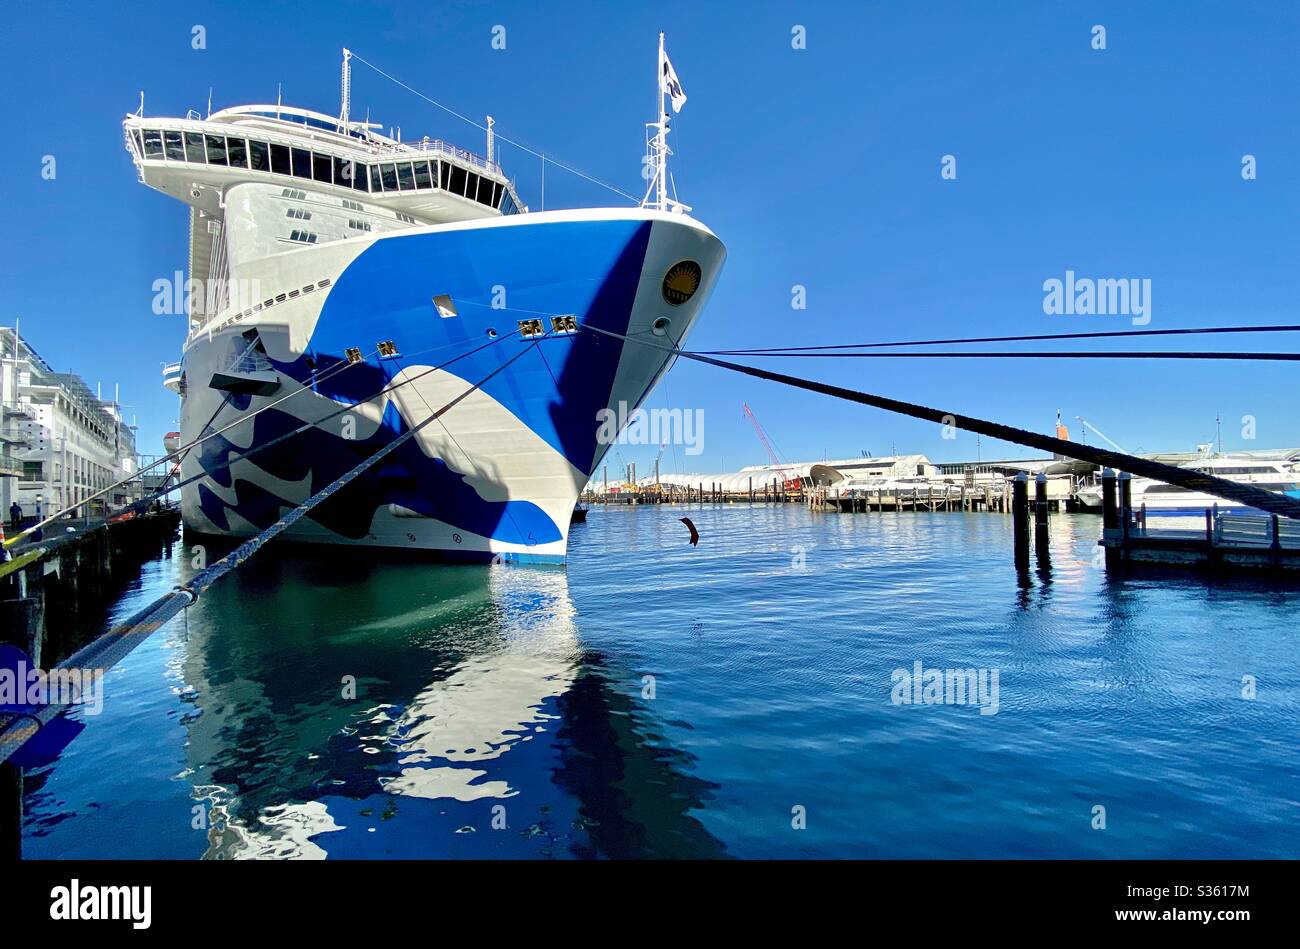 The Majestic Princess docked in the Prince’s Wharf in Auckland, New Zealand Stock Photo